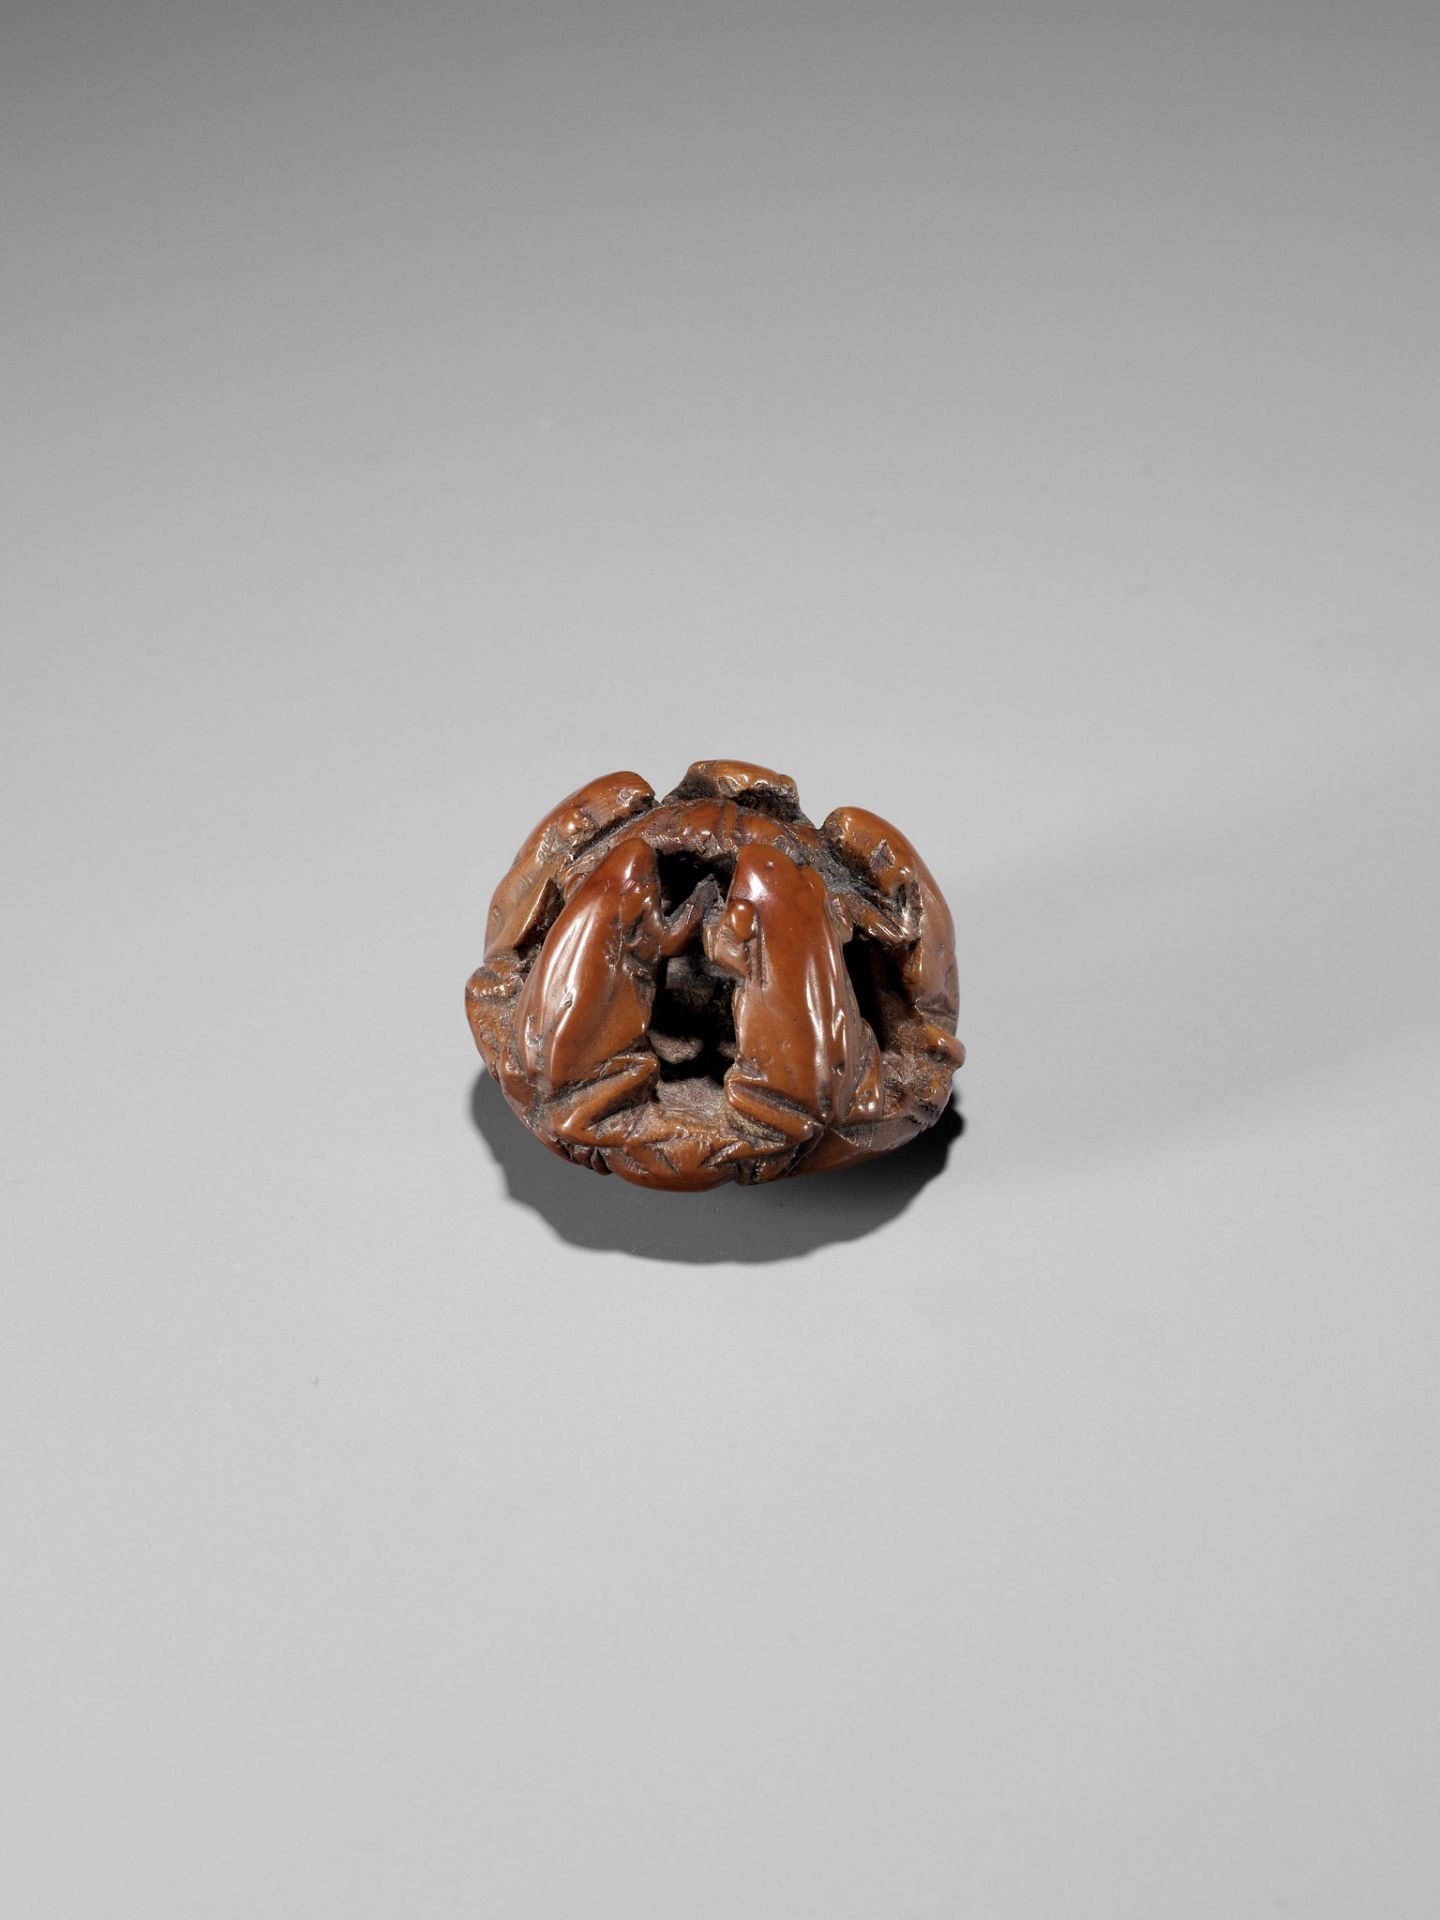 A RARE NUT NETSUKE OF FIVE FROGS ON A LOTUS LEAF, ATTRIBUTED TO SEIMIN - Image 4 of 9